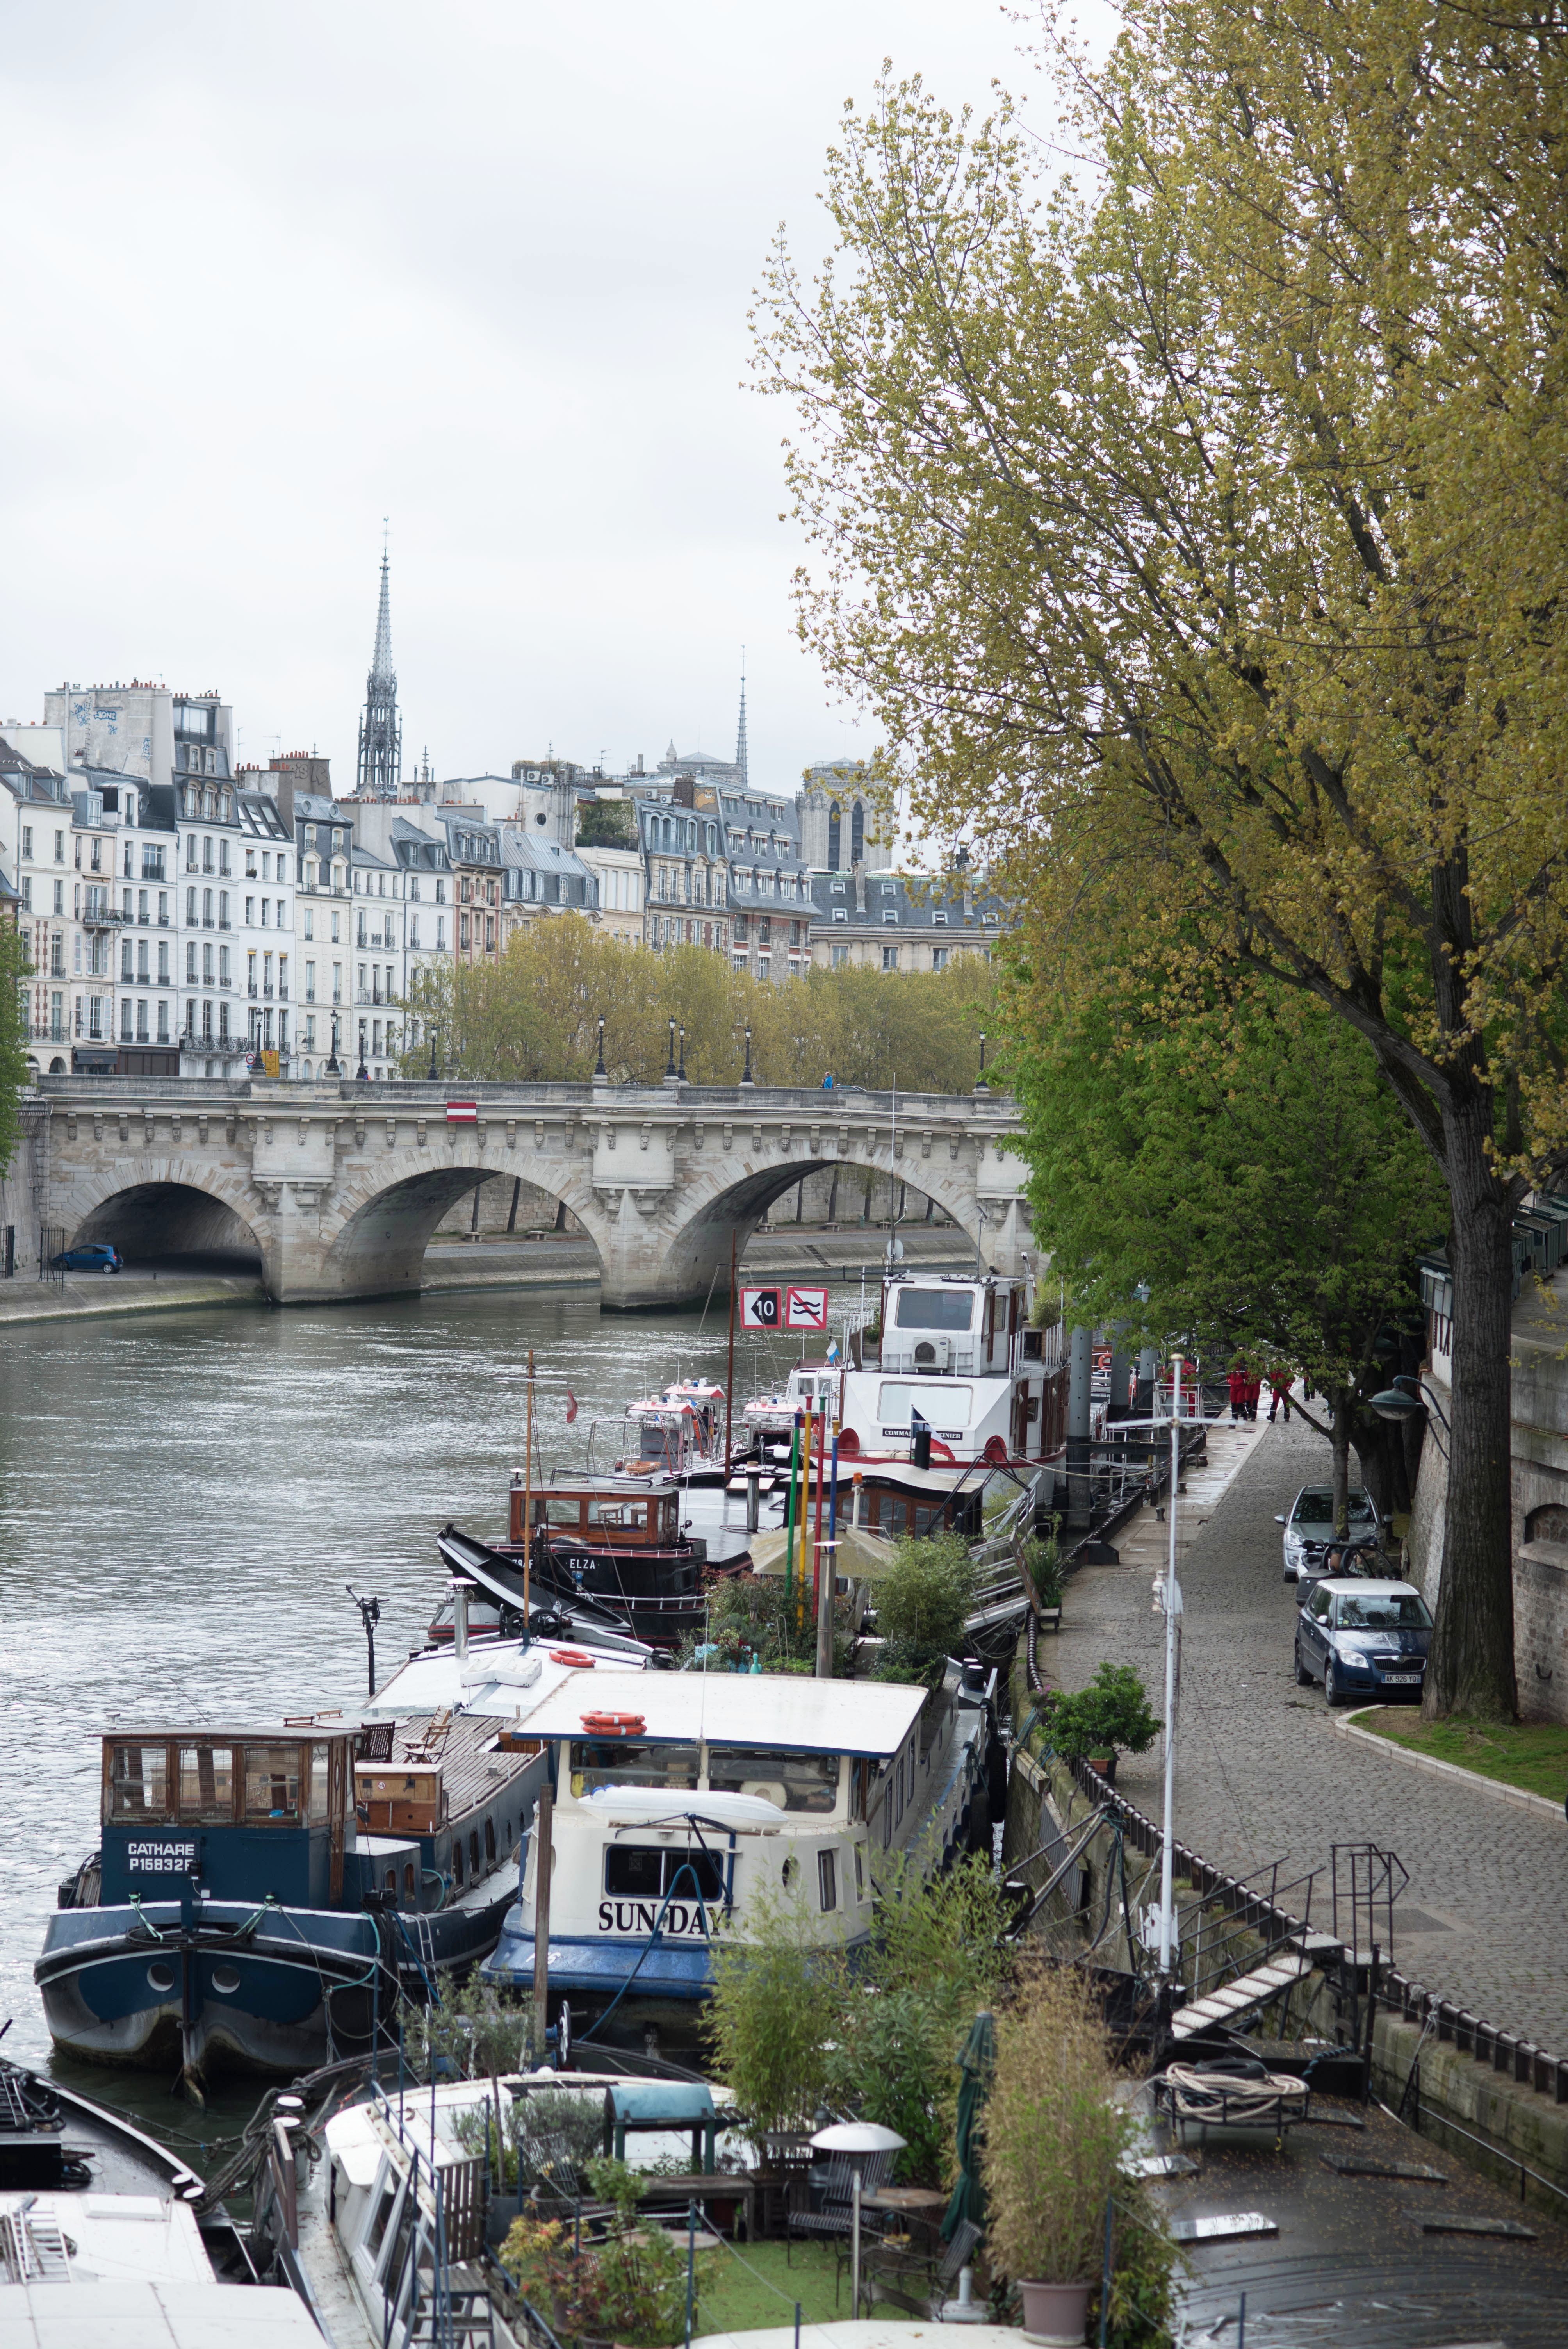 View of Pont Neuf and the Seine river in Paris captured by travel blogger Cee Fardoe of Coco & Vera